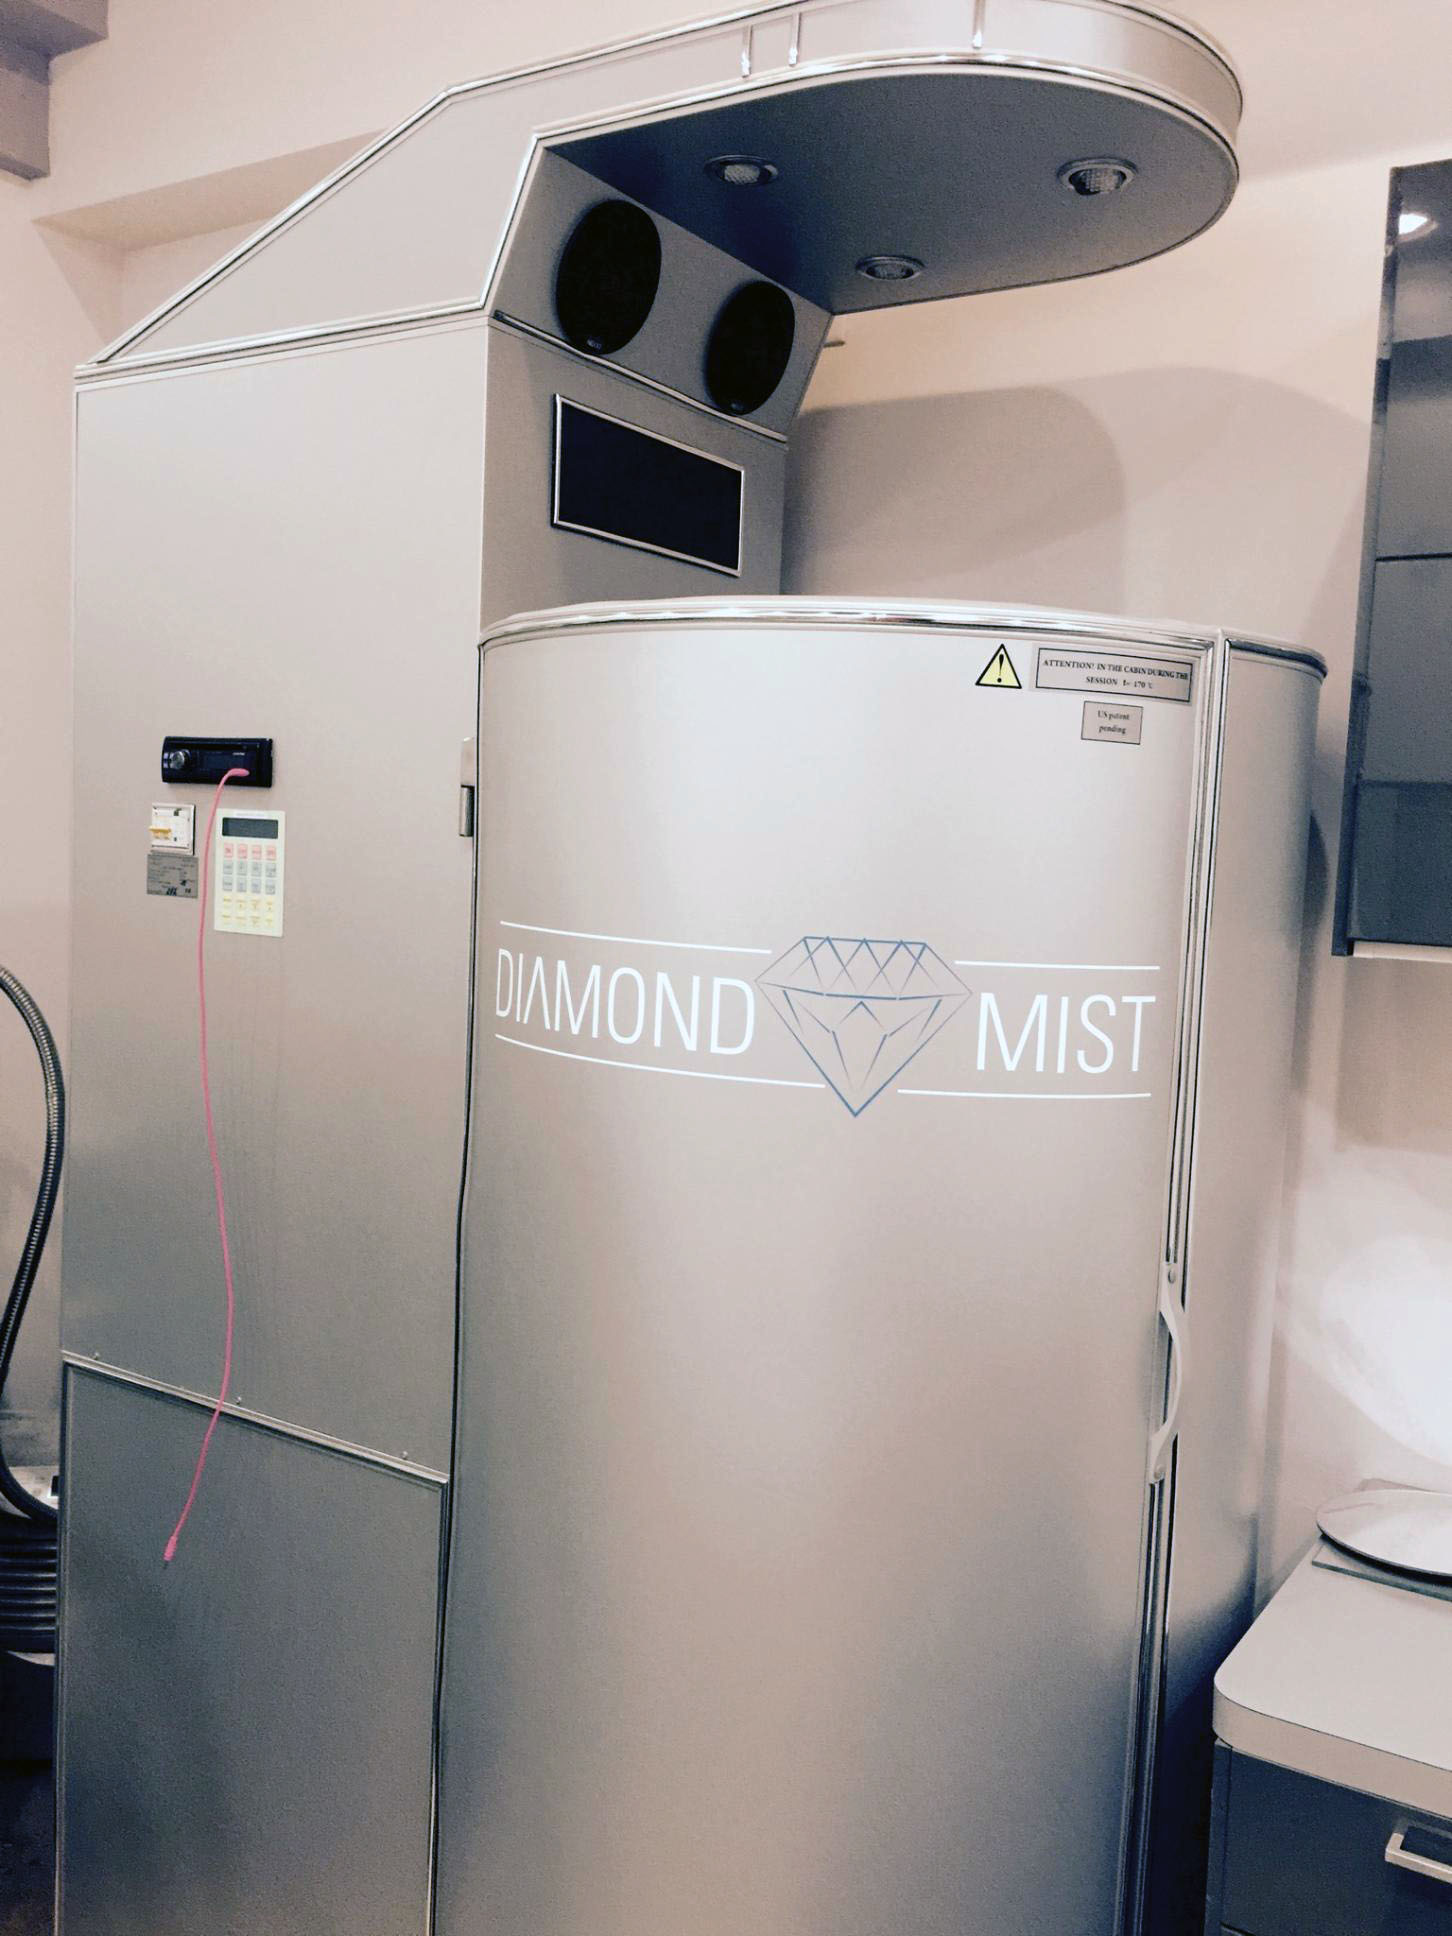 The Diamond Mist cryotherapy chamber provides athletes and others with multiple benefits